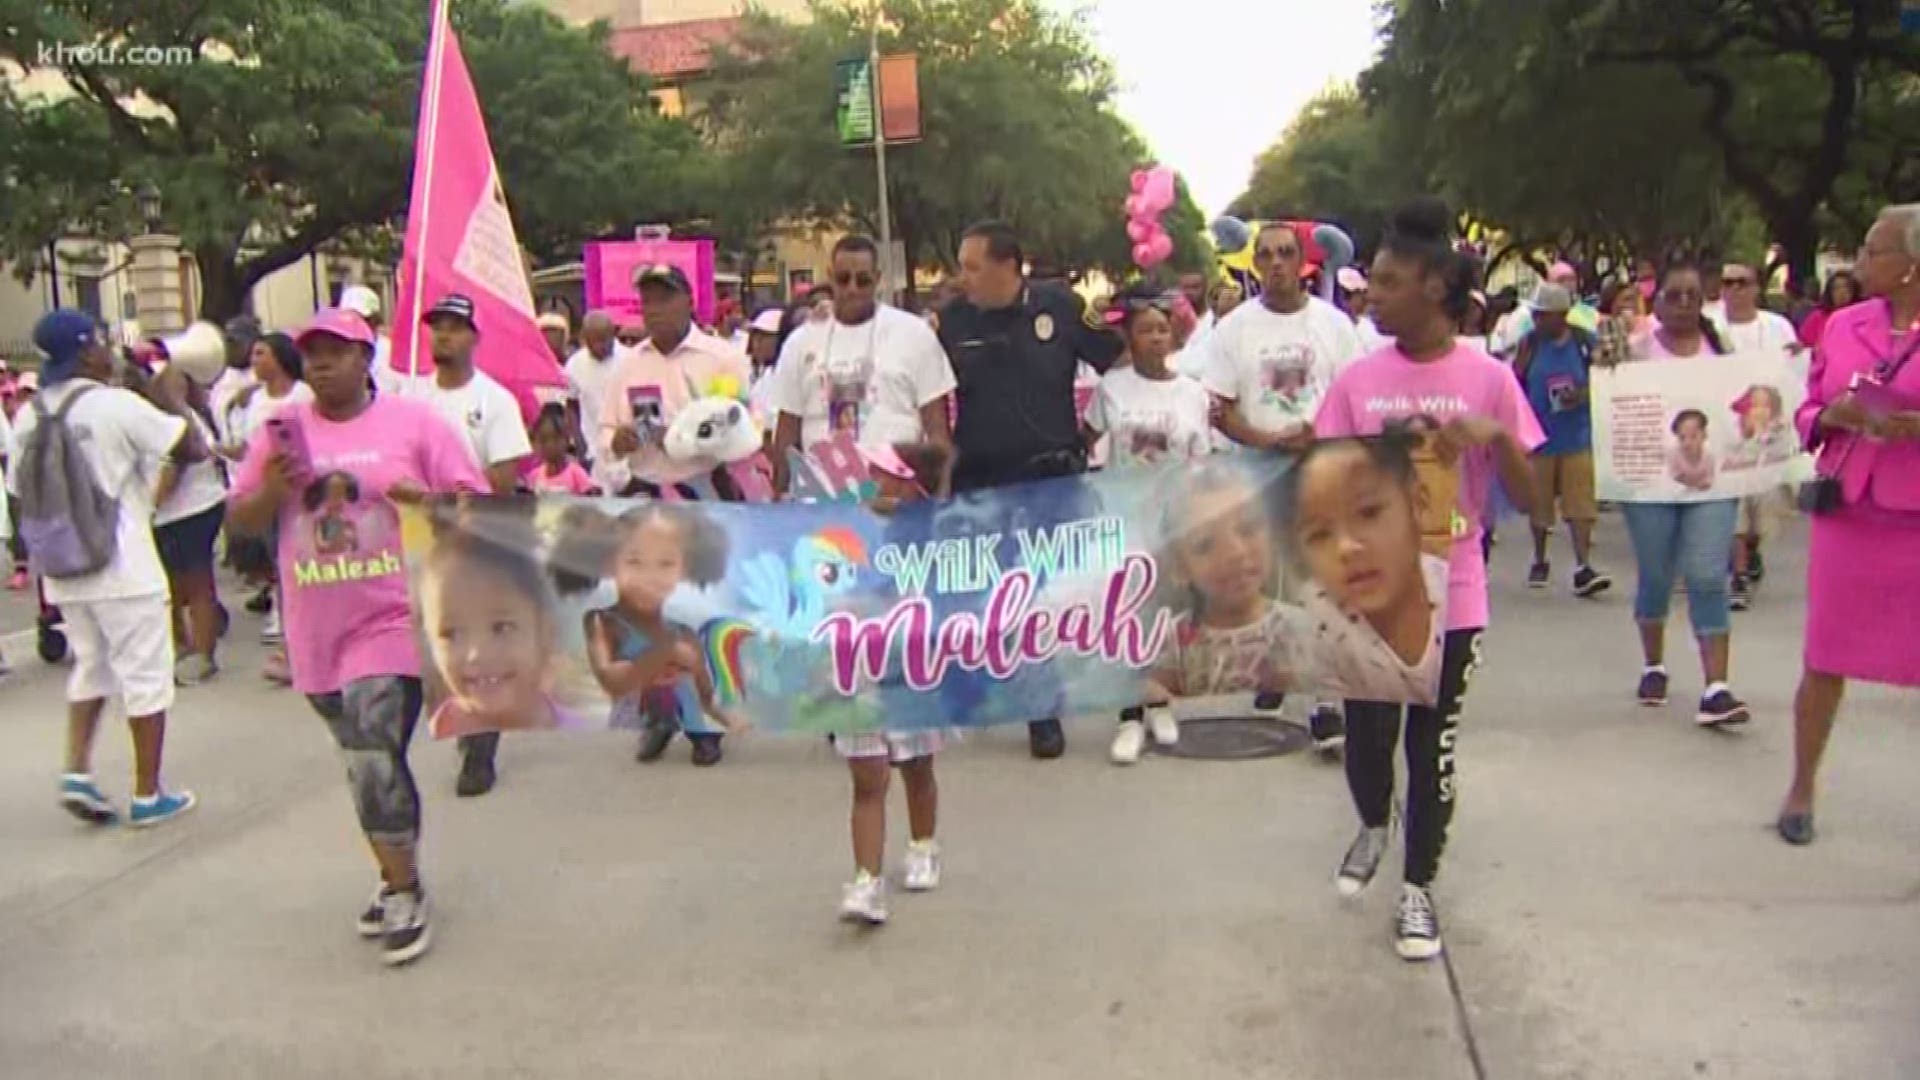 Thousands of people marched in downtown Houston, wearing pink and calling for justice for Maleah Davis.